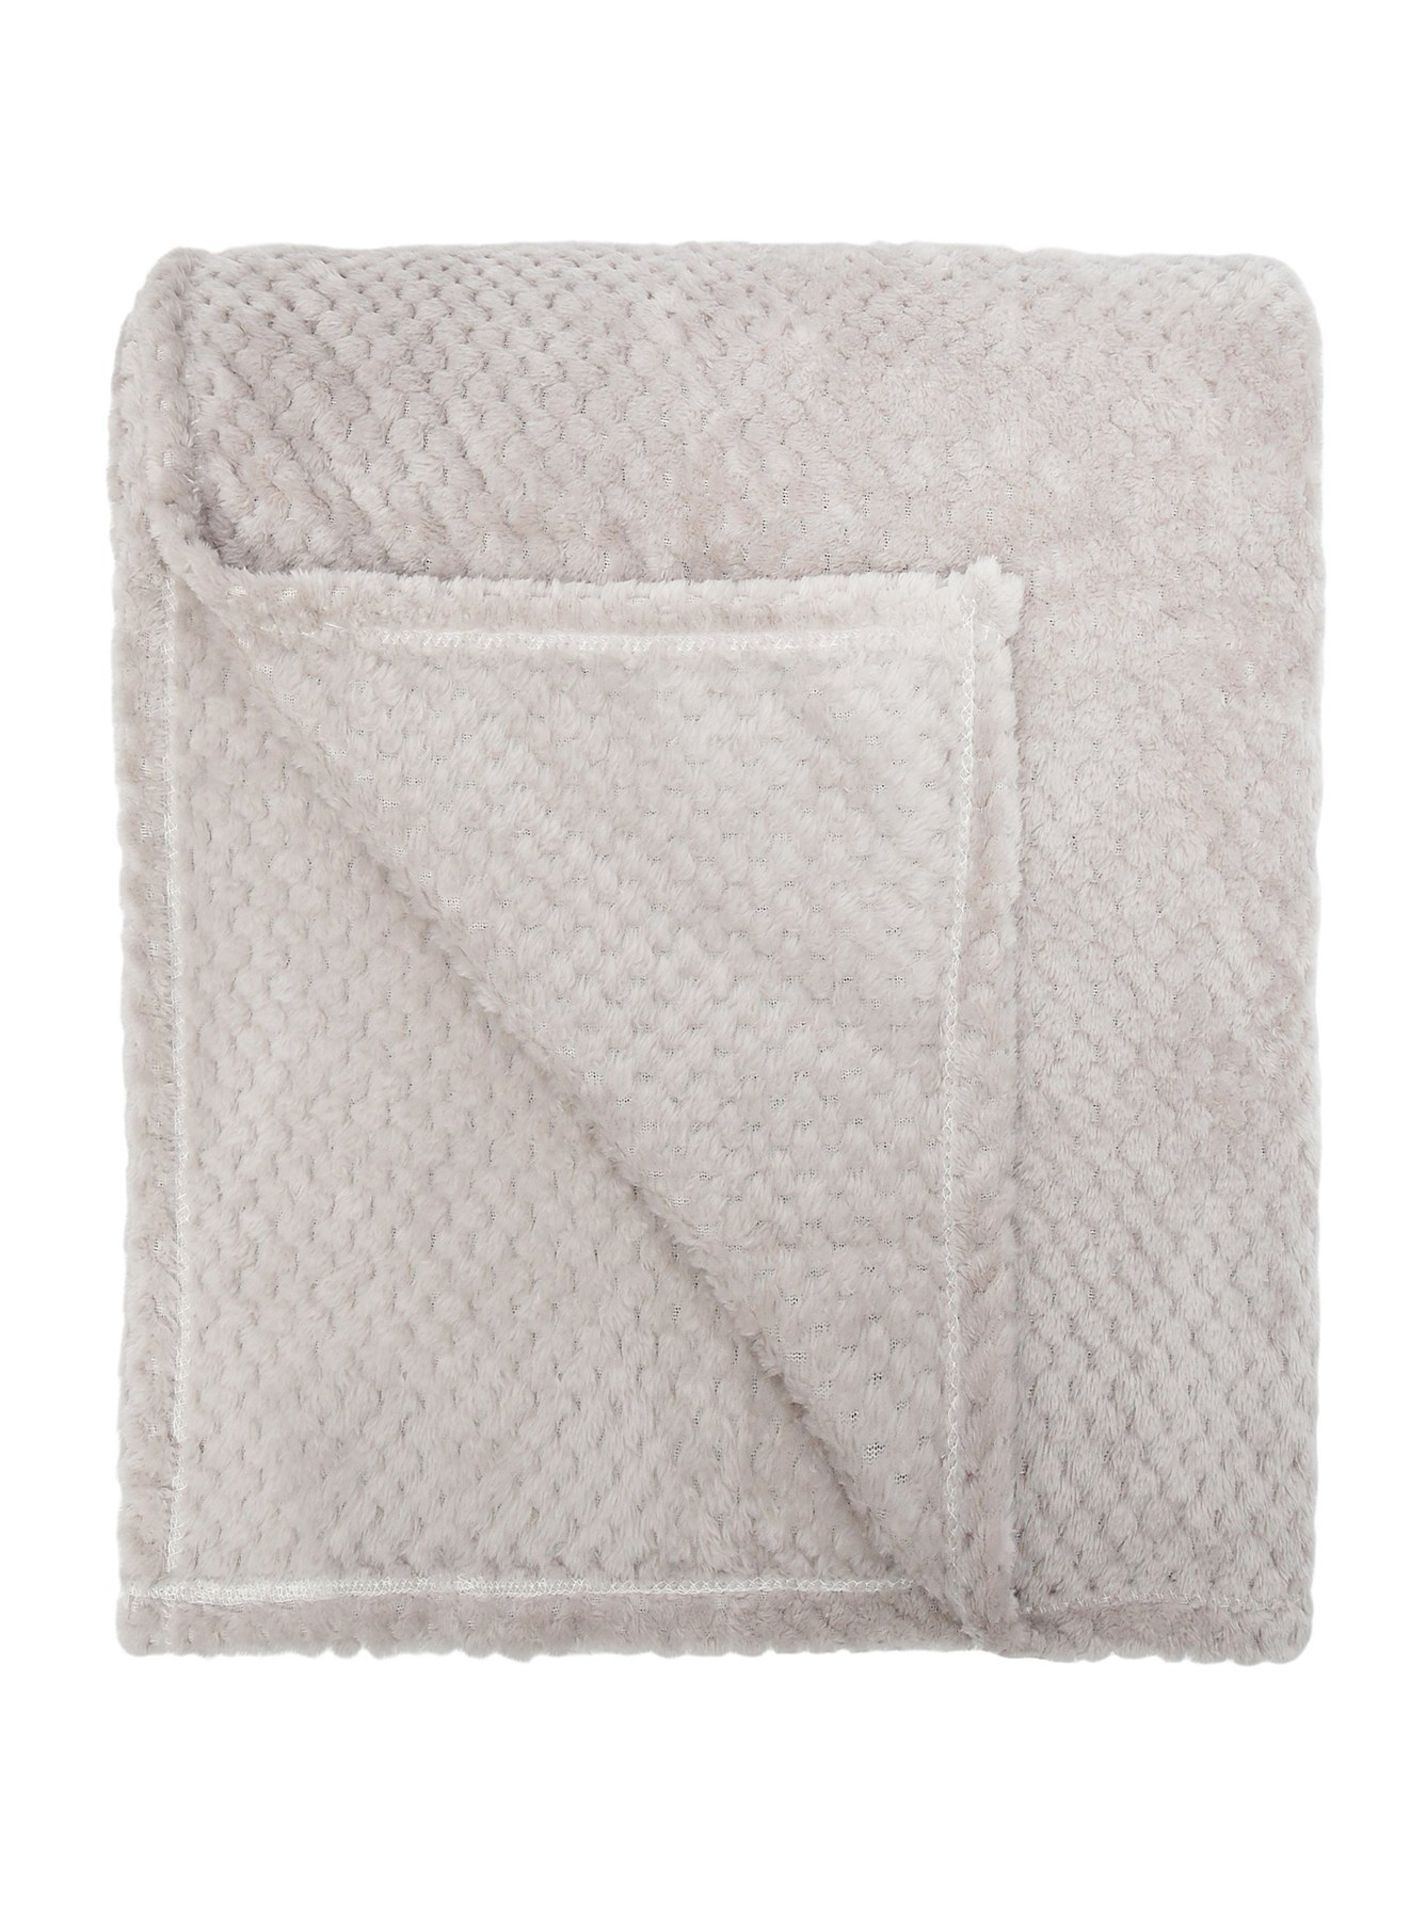 16x NEW & PACKAGED SLEEPDOWN Cosy Collection Soft Touch Waffle Fleece Throw 130 x 160cm - NATURAL. - Image 6 of 7